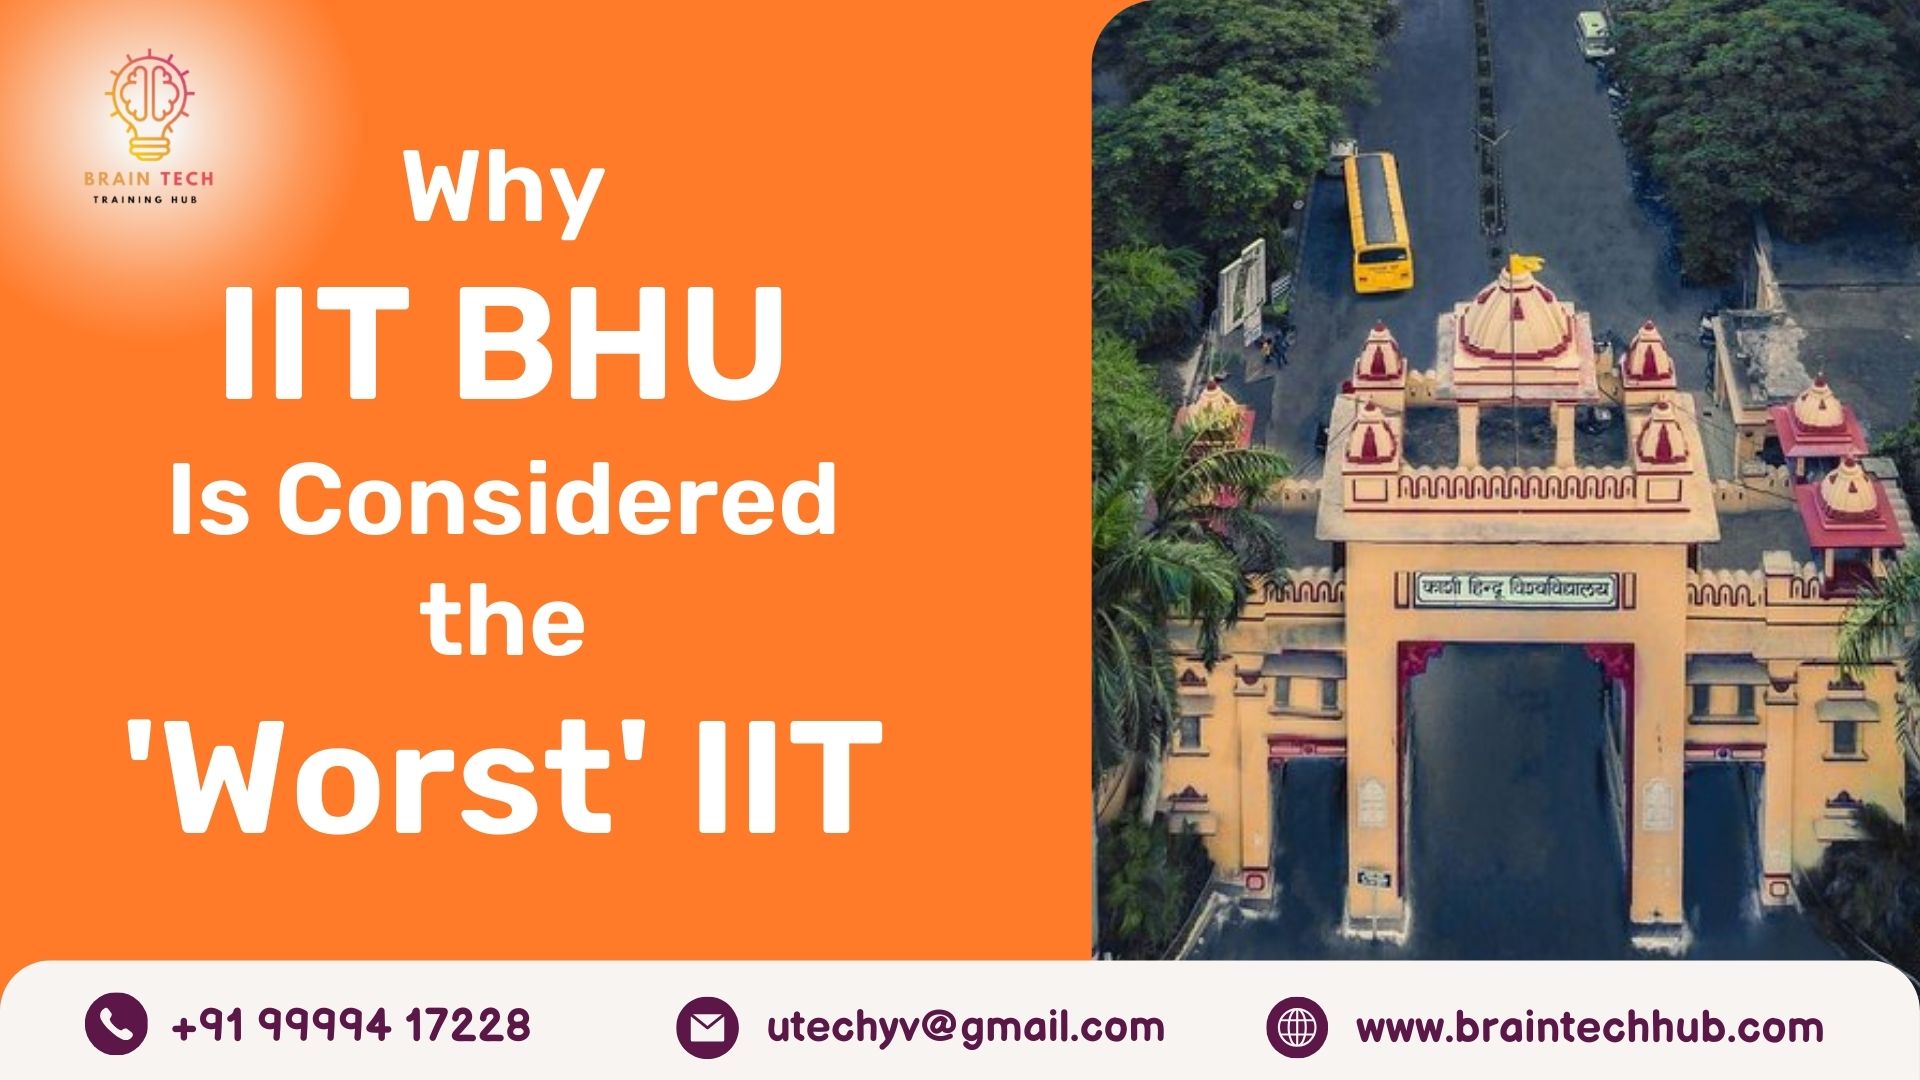 Why IIT BHU is Considered the 'Worst' IIT - You Won't Believe What We Found!